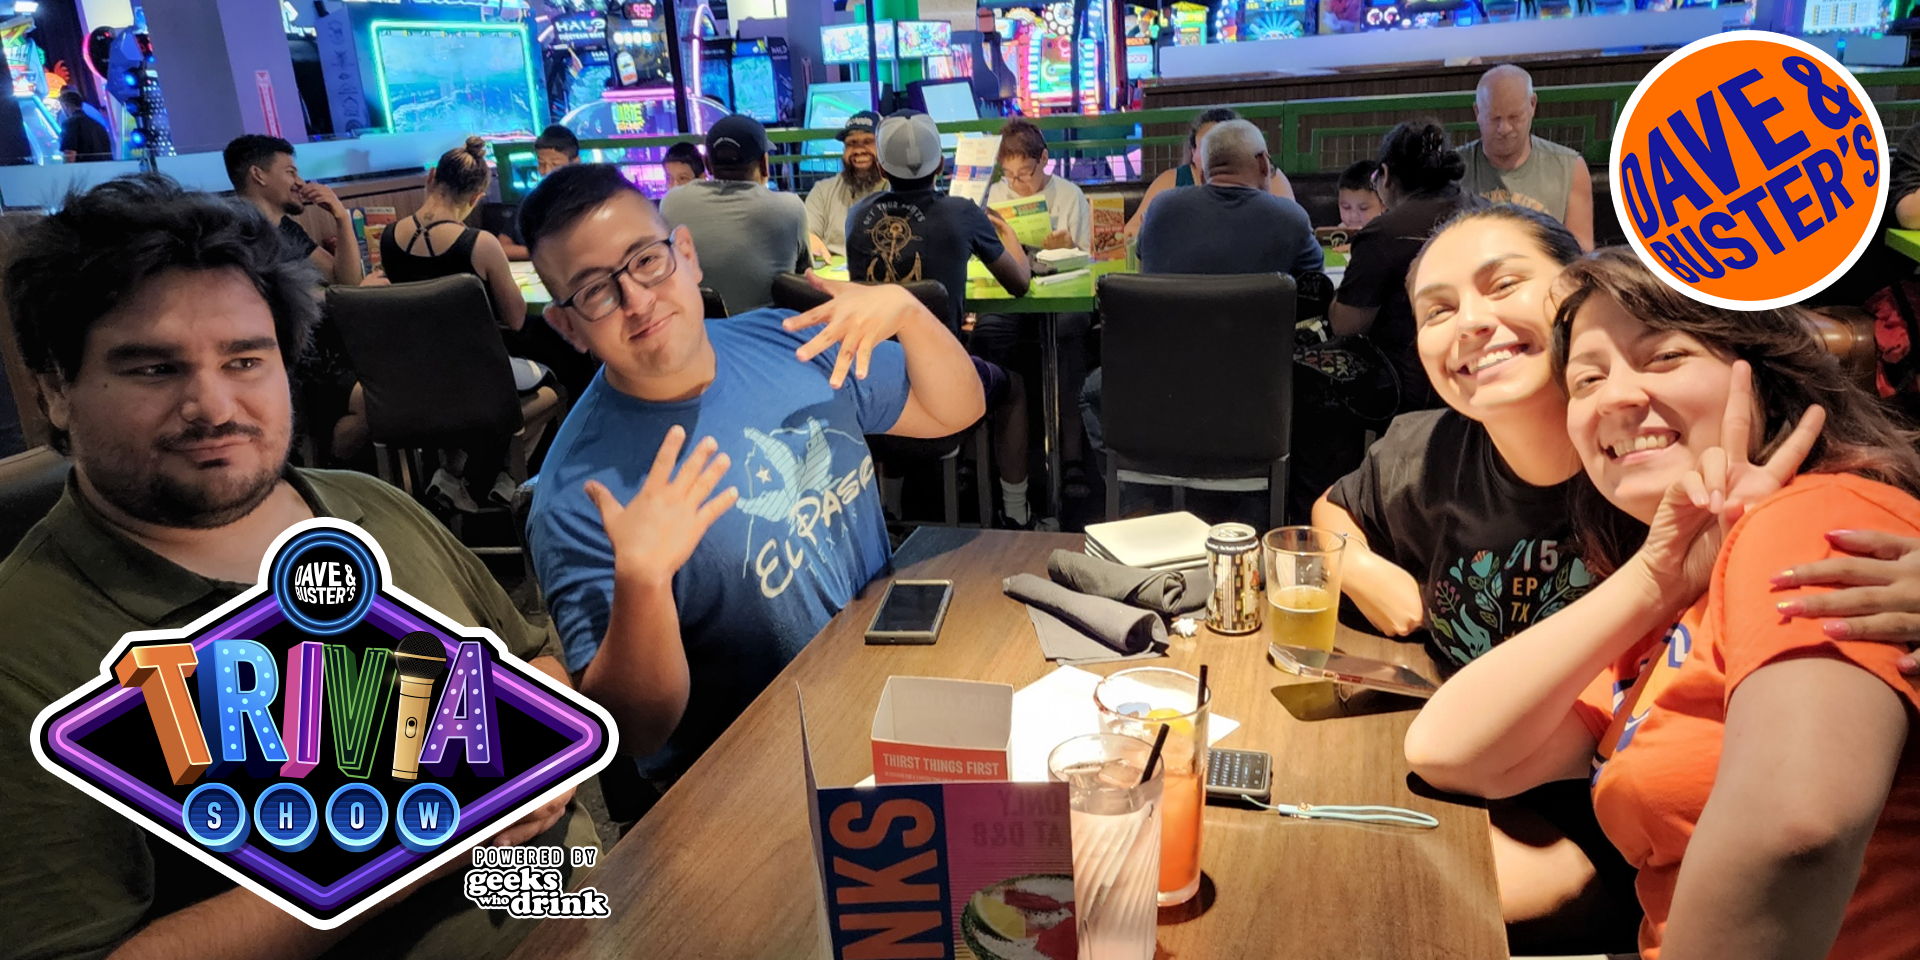 Geeks Who Drink Trivia Night at Dave and Buster's - El Paso promotional image